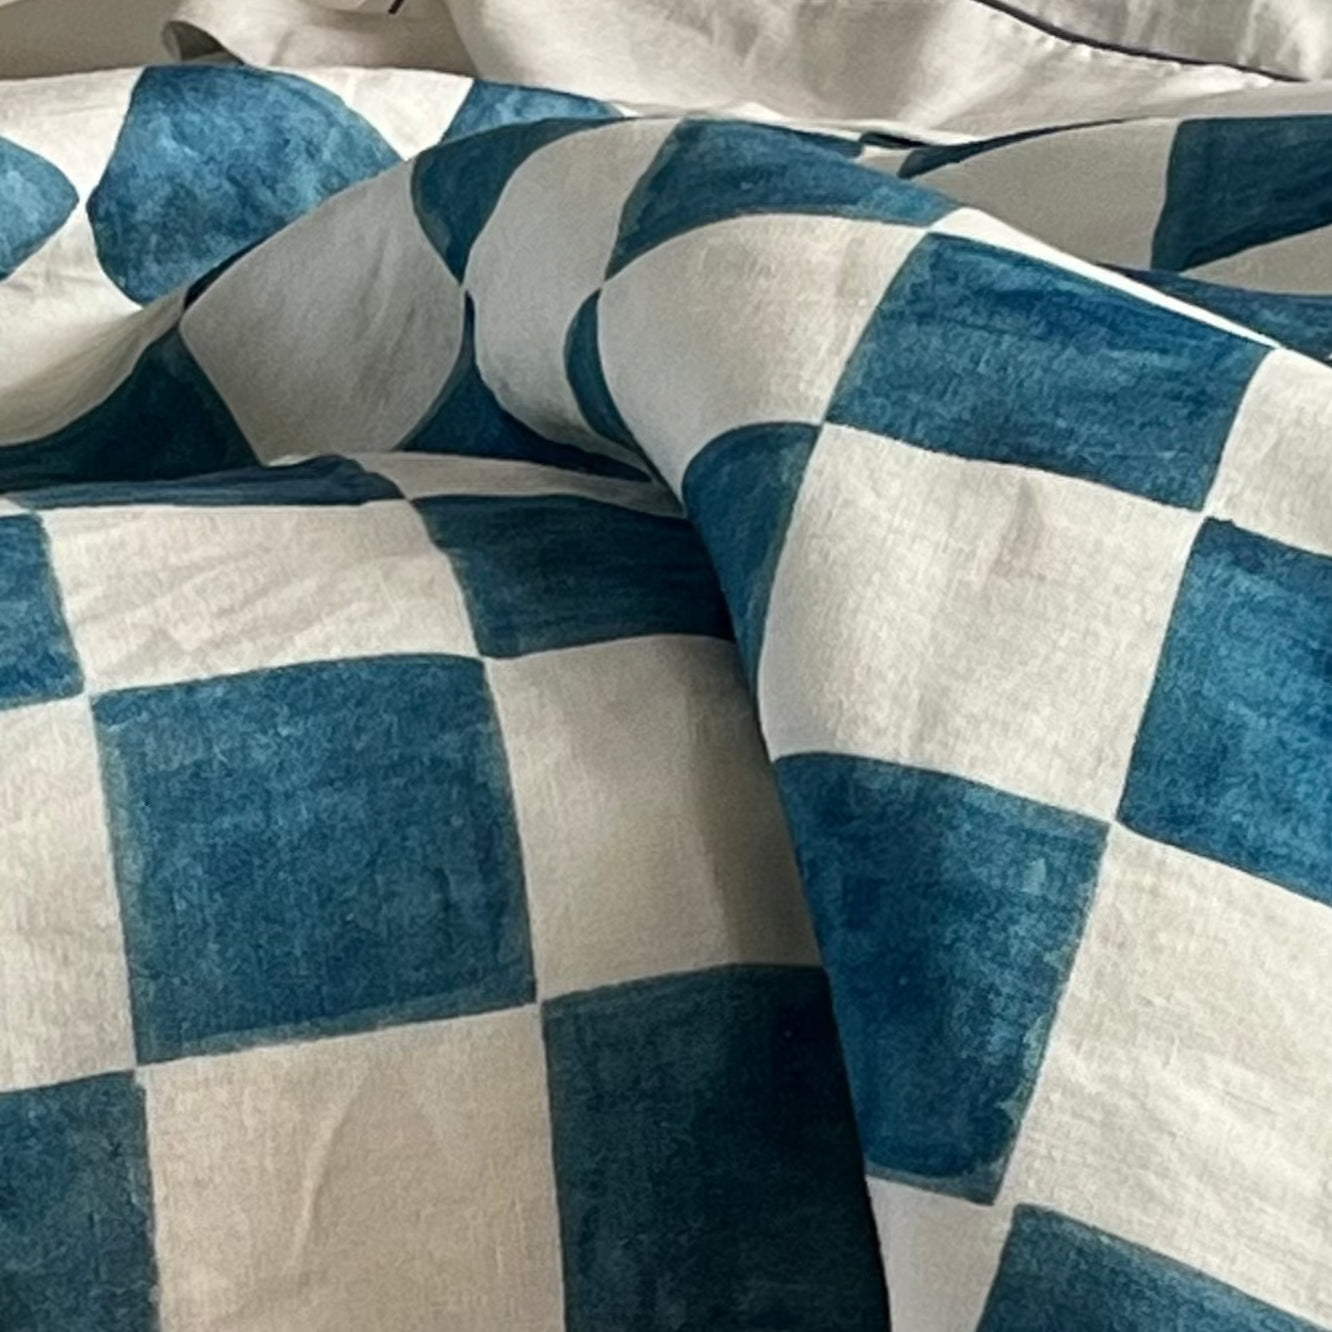 special edition - linen blanket with chess printed pattern